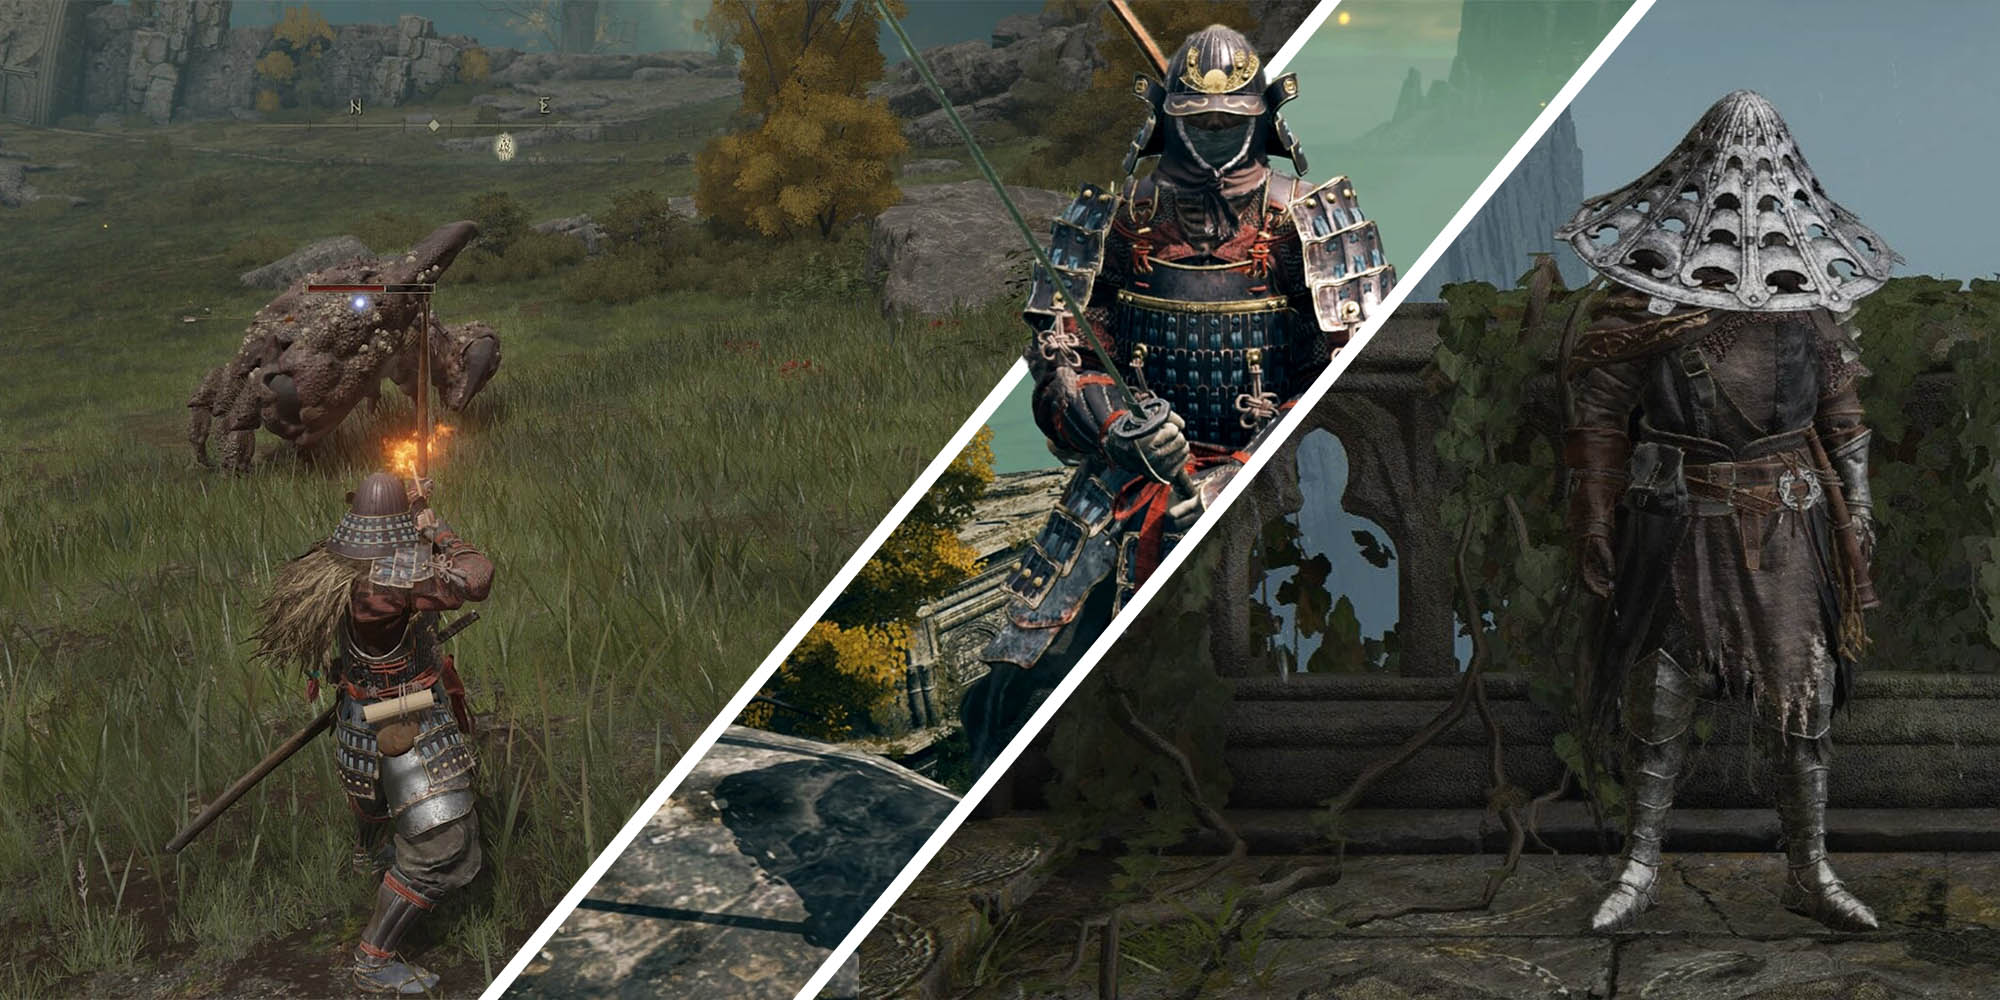 Elden Ring Samurai Build: Which Stats and Armor to Choose?